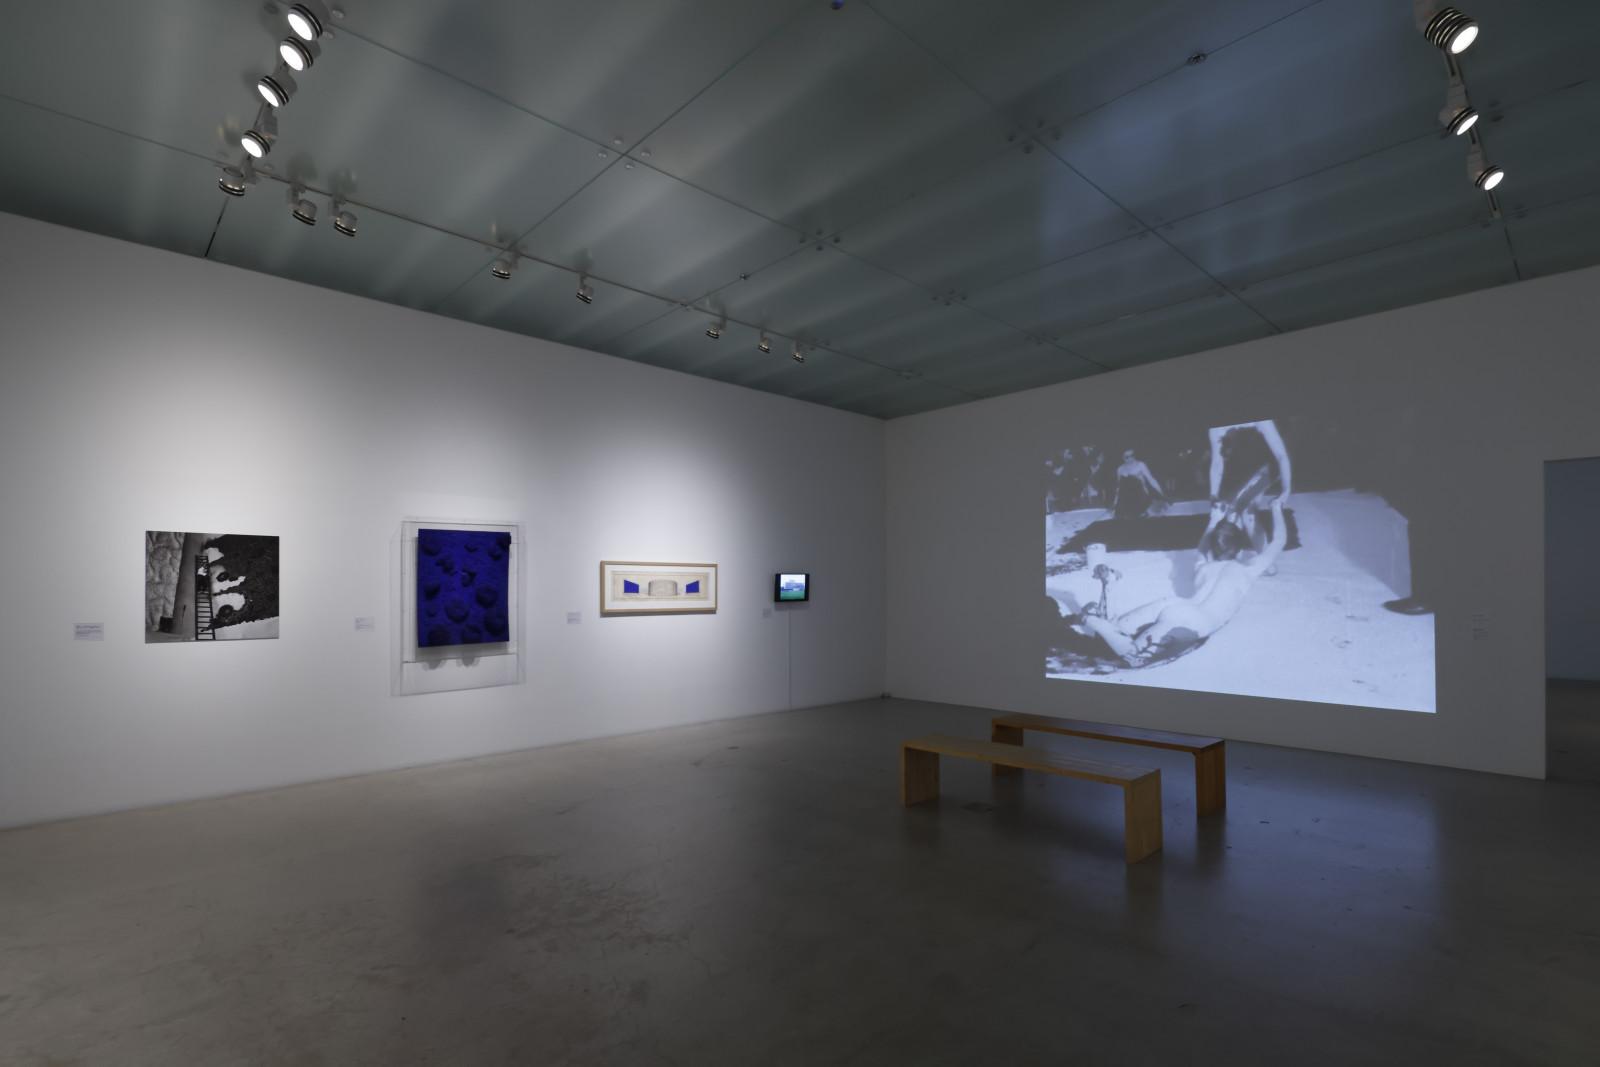 View of the exhibition "The Timeless Imagination of Yves Klein - Uncertainty and the Immateriality", 21st Century Museum of Contemporary Art, Kanazawa, Japan, 2022